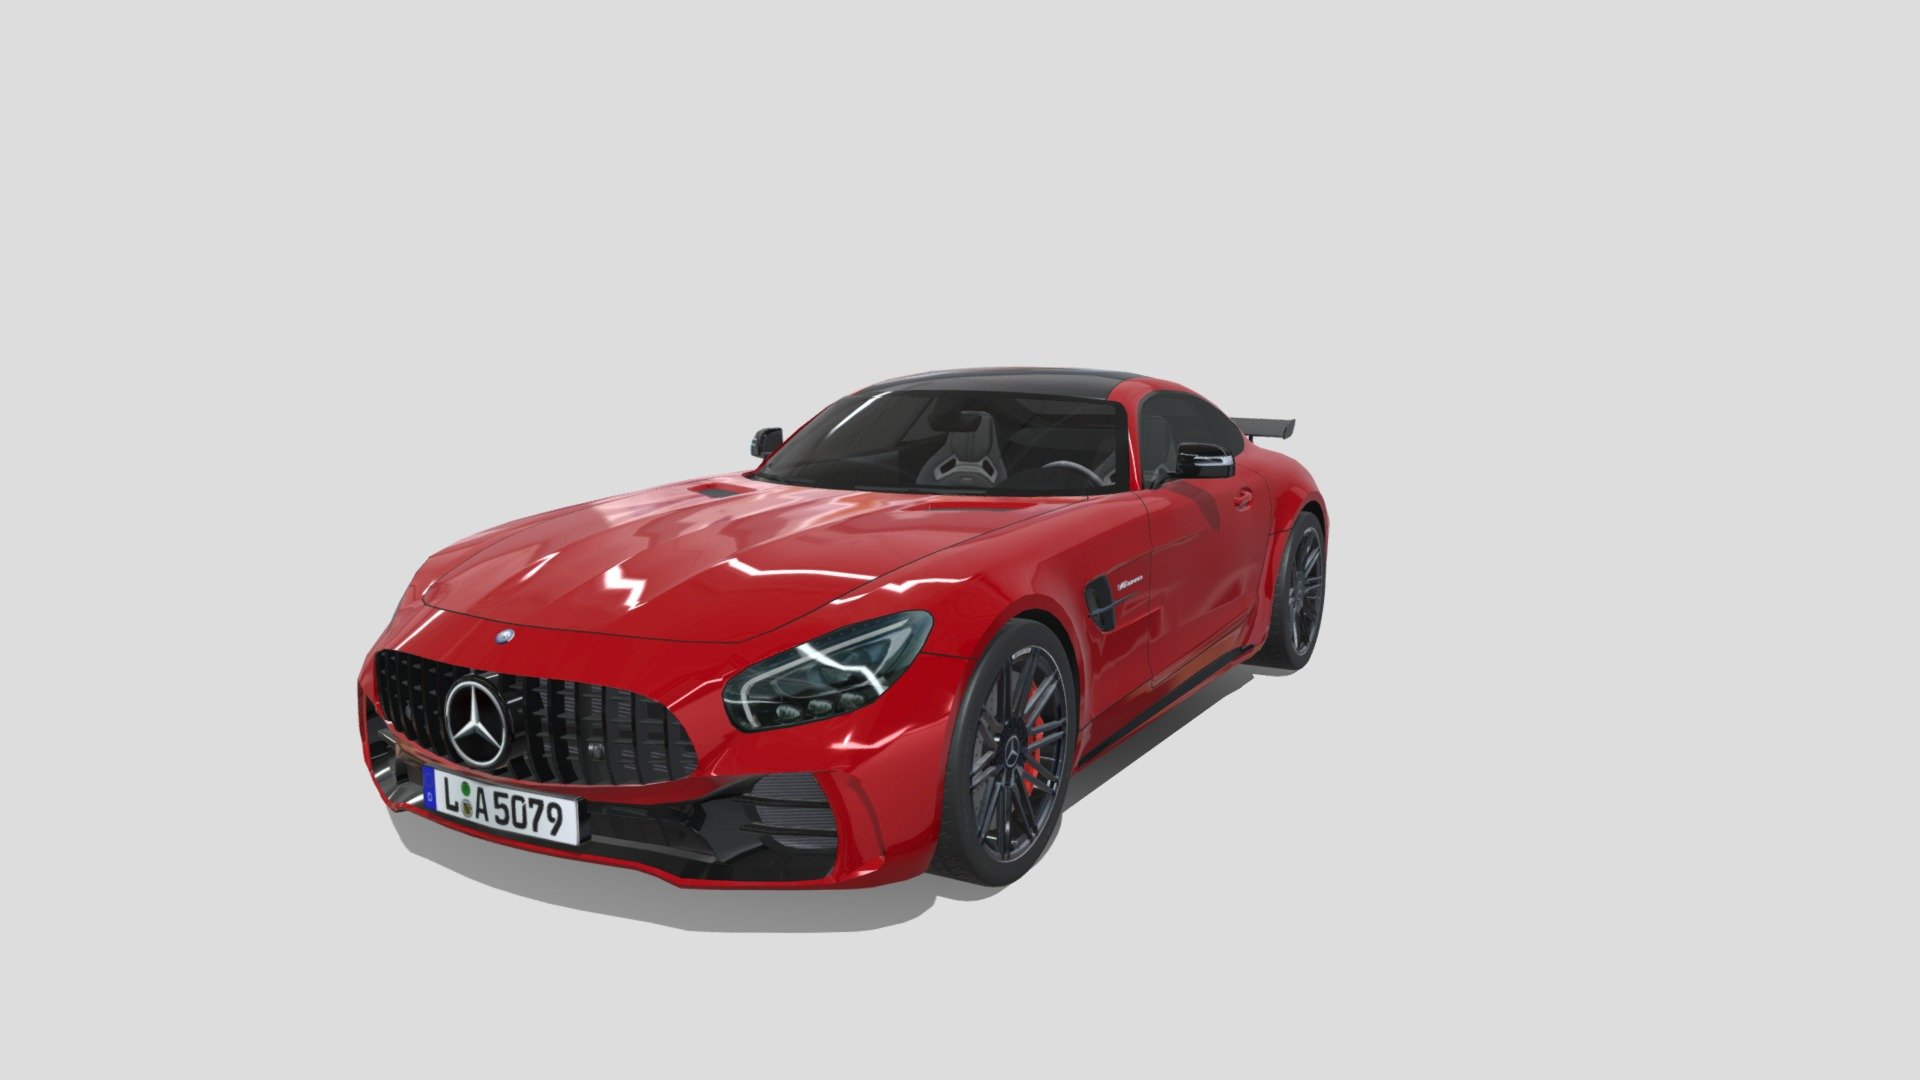 This is low-poly model of Mercedes-Benz AMG GTR.

Even with a low number of polygons the level of detail remains high.

Blender 3.1 standard materials.

Photo textures.

Real world scale.




Width: 2.075 mm

Lenght: 4.551 mm

Height: 1.284 mm

You can easily change main color of the vehicle.

Model also includes lowpoly interior.
Interior is only for better outside visual detail.

All parts have the correct name.




For body - AMG.Body

For wheel - AMG.Wheel.Ft.L      

Ft.L means front left wheel.

For brake caliper - AMG.WheelBrake.Ft.L

Origins are also in the right place.

With naming like that it will be easier to rigge, animate the model.




Vertices: 21,939

Edges: 42,928

Faces: 20,908

Triangles: 41,254

If you want to buy this model or my other models, you can find them on other platforms where my name is: PieEntertainment. Or just write here in the comments.

Includes photo textures with 4K resolution.
HDR not included 3d model